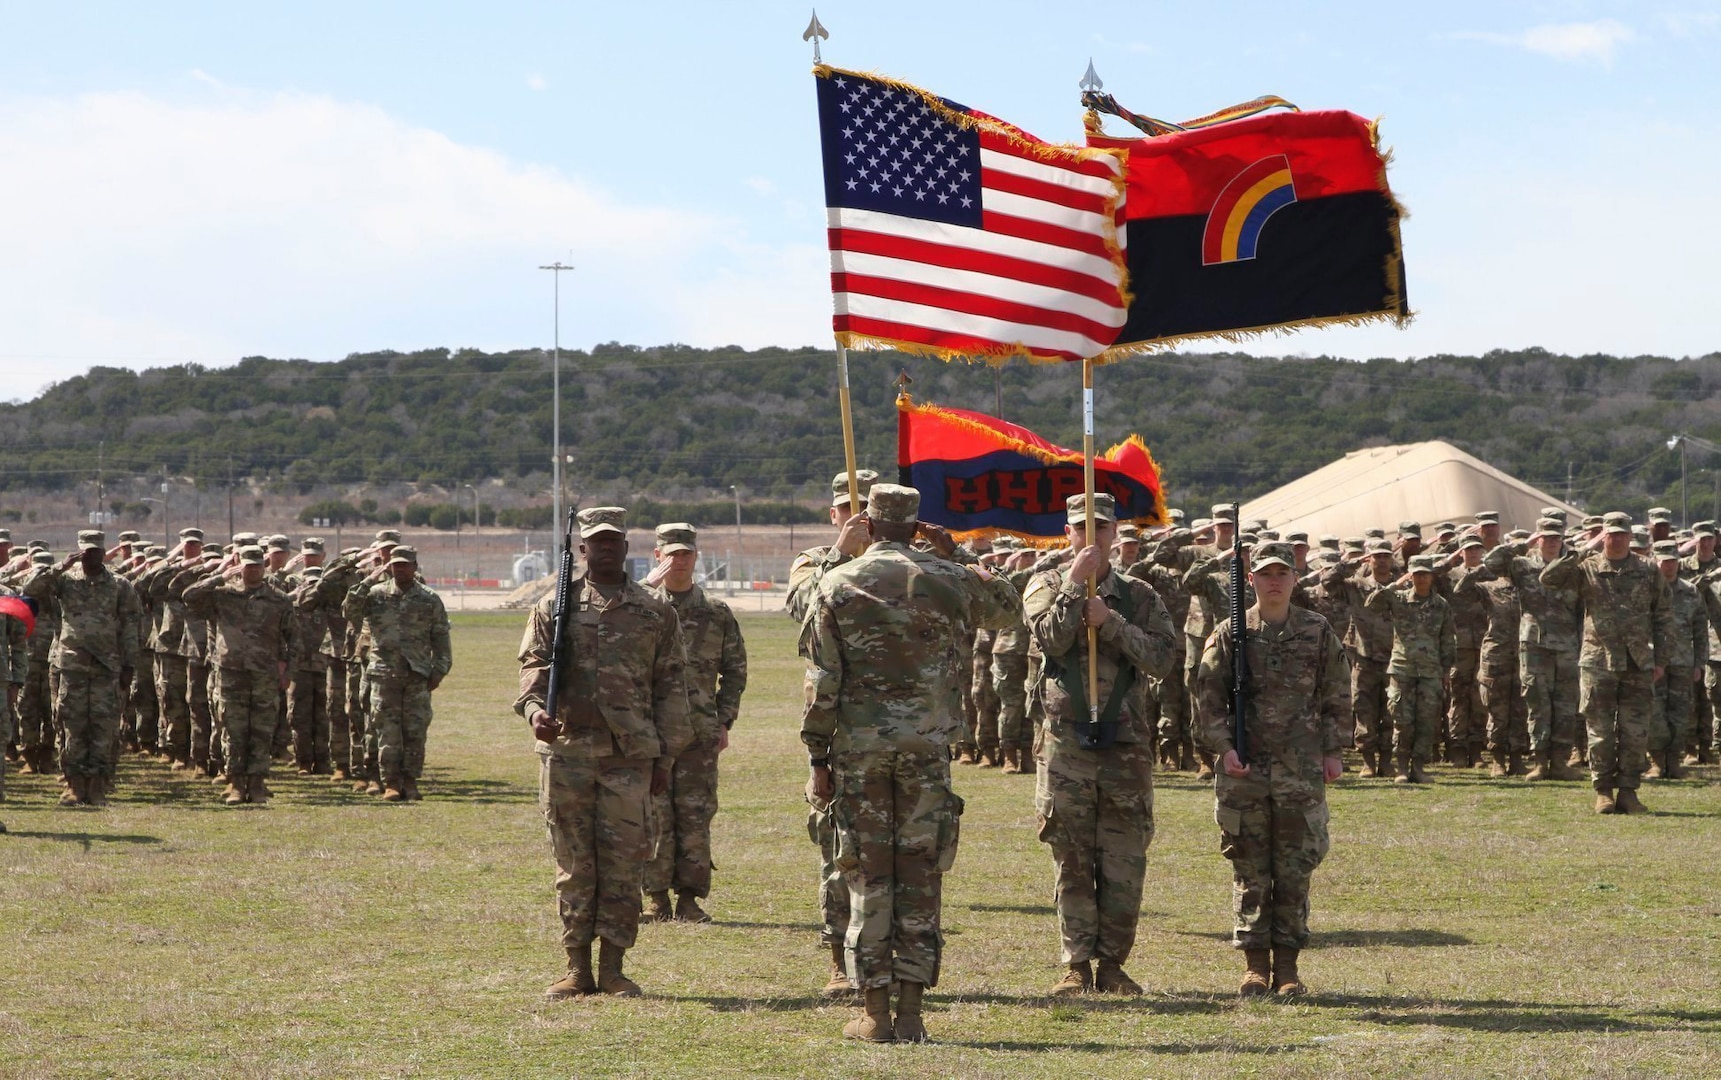 New York Army National Guard Soldiers assigned to the 42nd Infantry Division conduct a casing of the Colors Ceremony on Fort Drum, Texas, Feb. 29, 2020. The ceremony signals the 42nd's readiness to deploy in support of the United States Army Central Command.